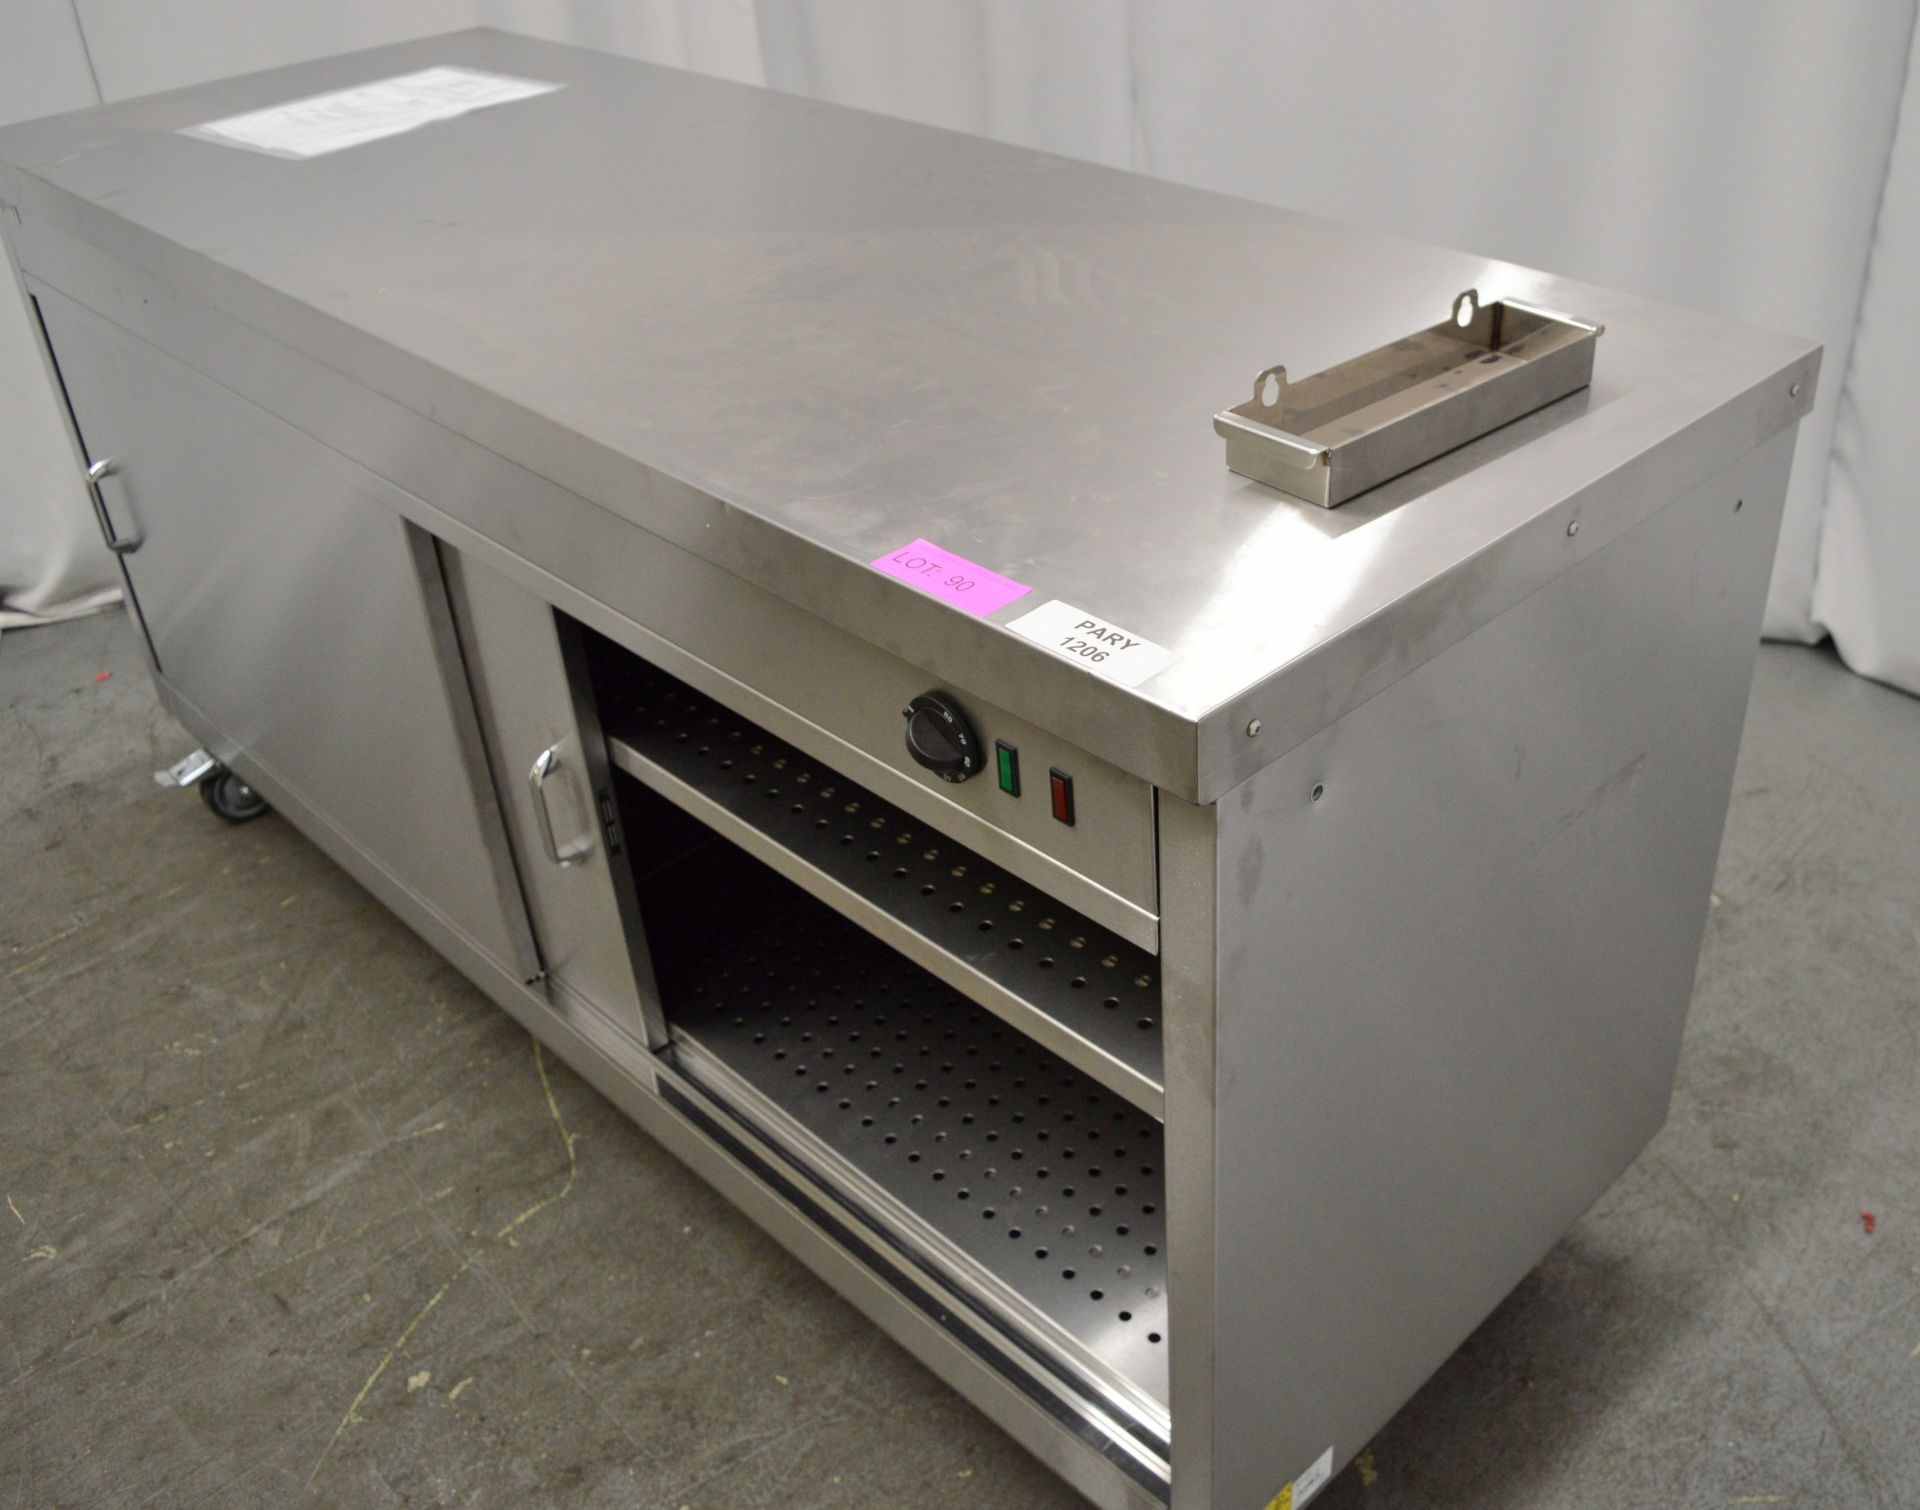 Parry HOT18 stainless steel hot cupboard, 1800x650x900mm (LxDxH) 230v - Image 5 of 6